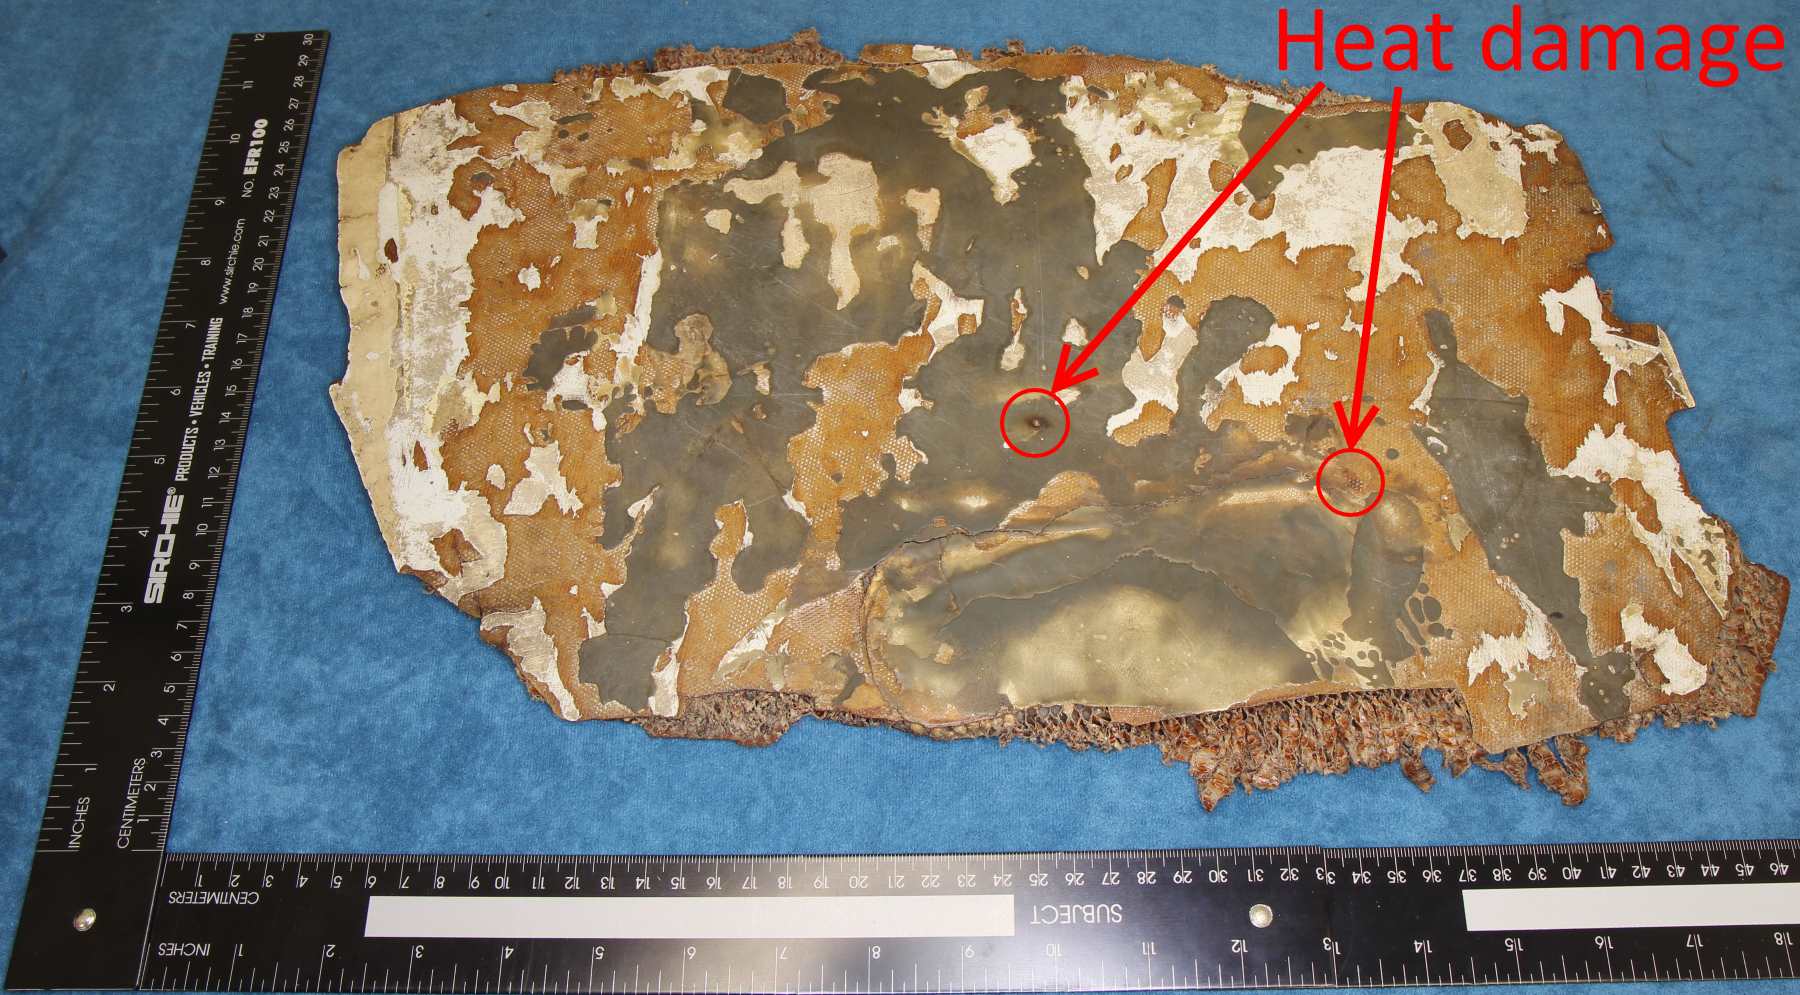 An item of possible MH370 debris shows localised heat damage - but it is thought to be recent